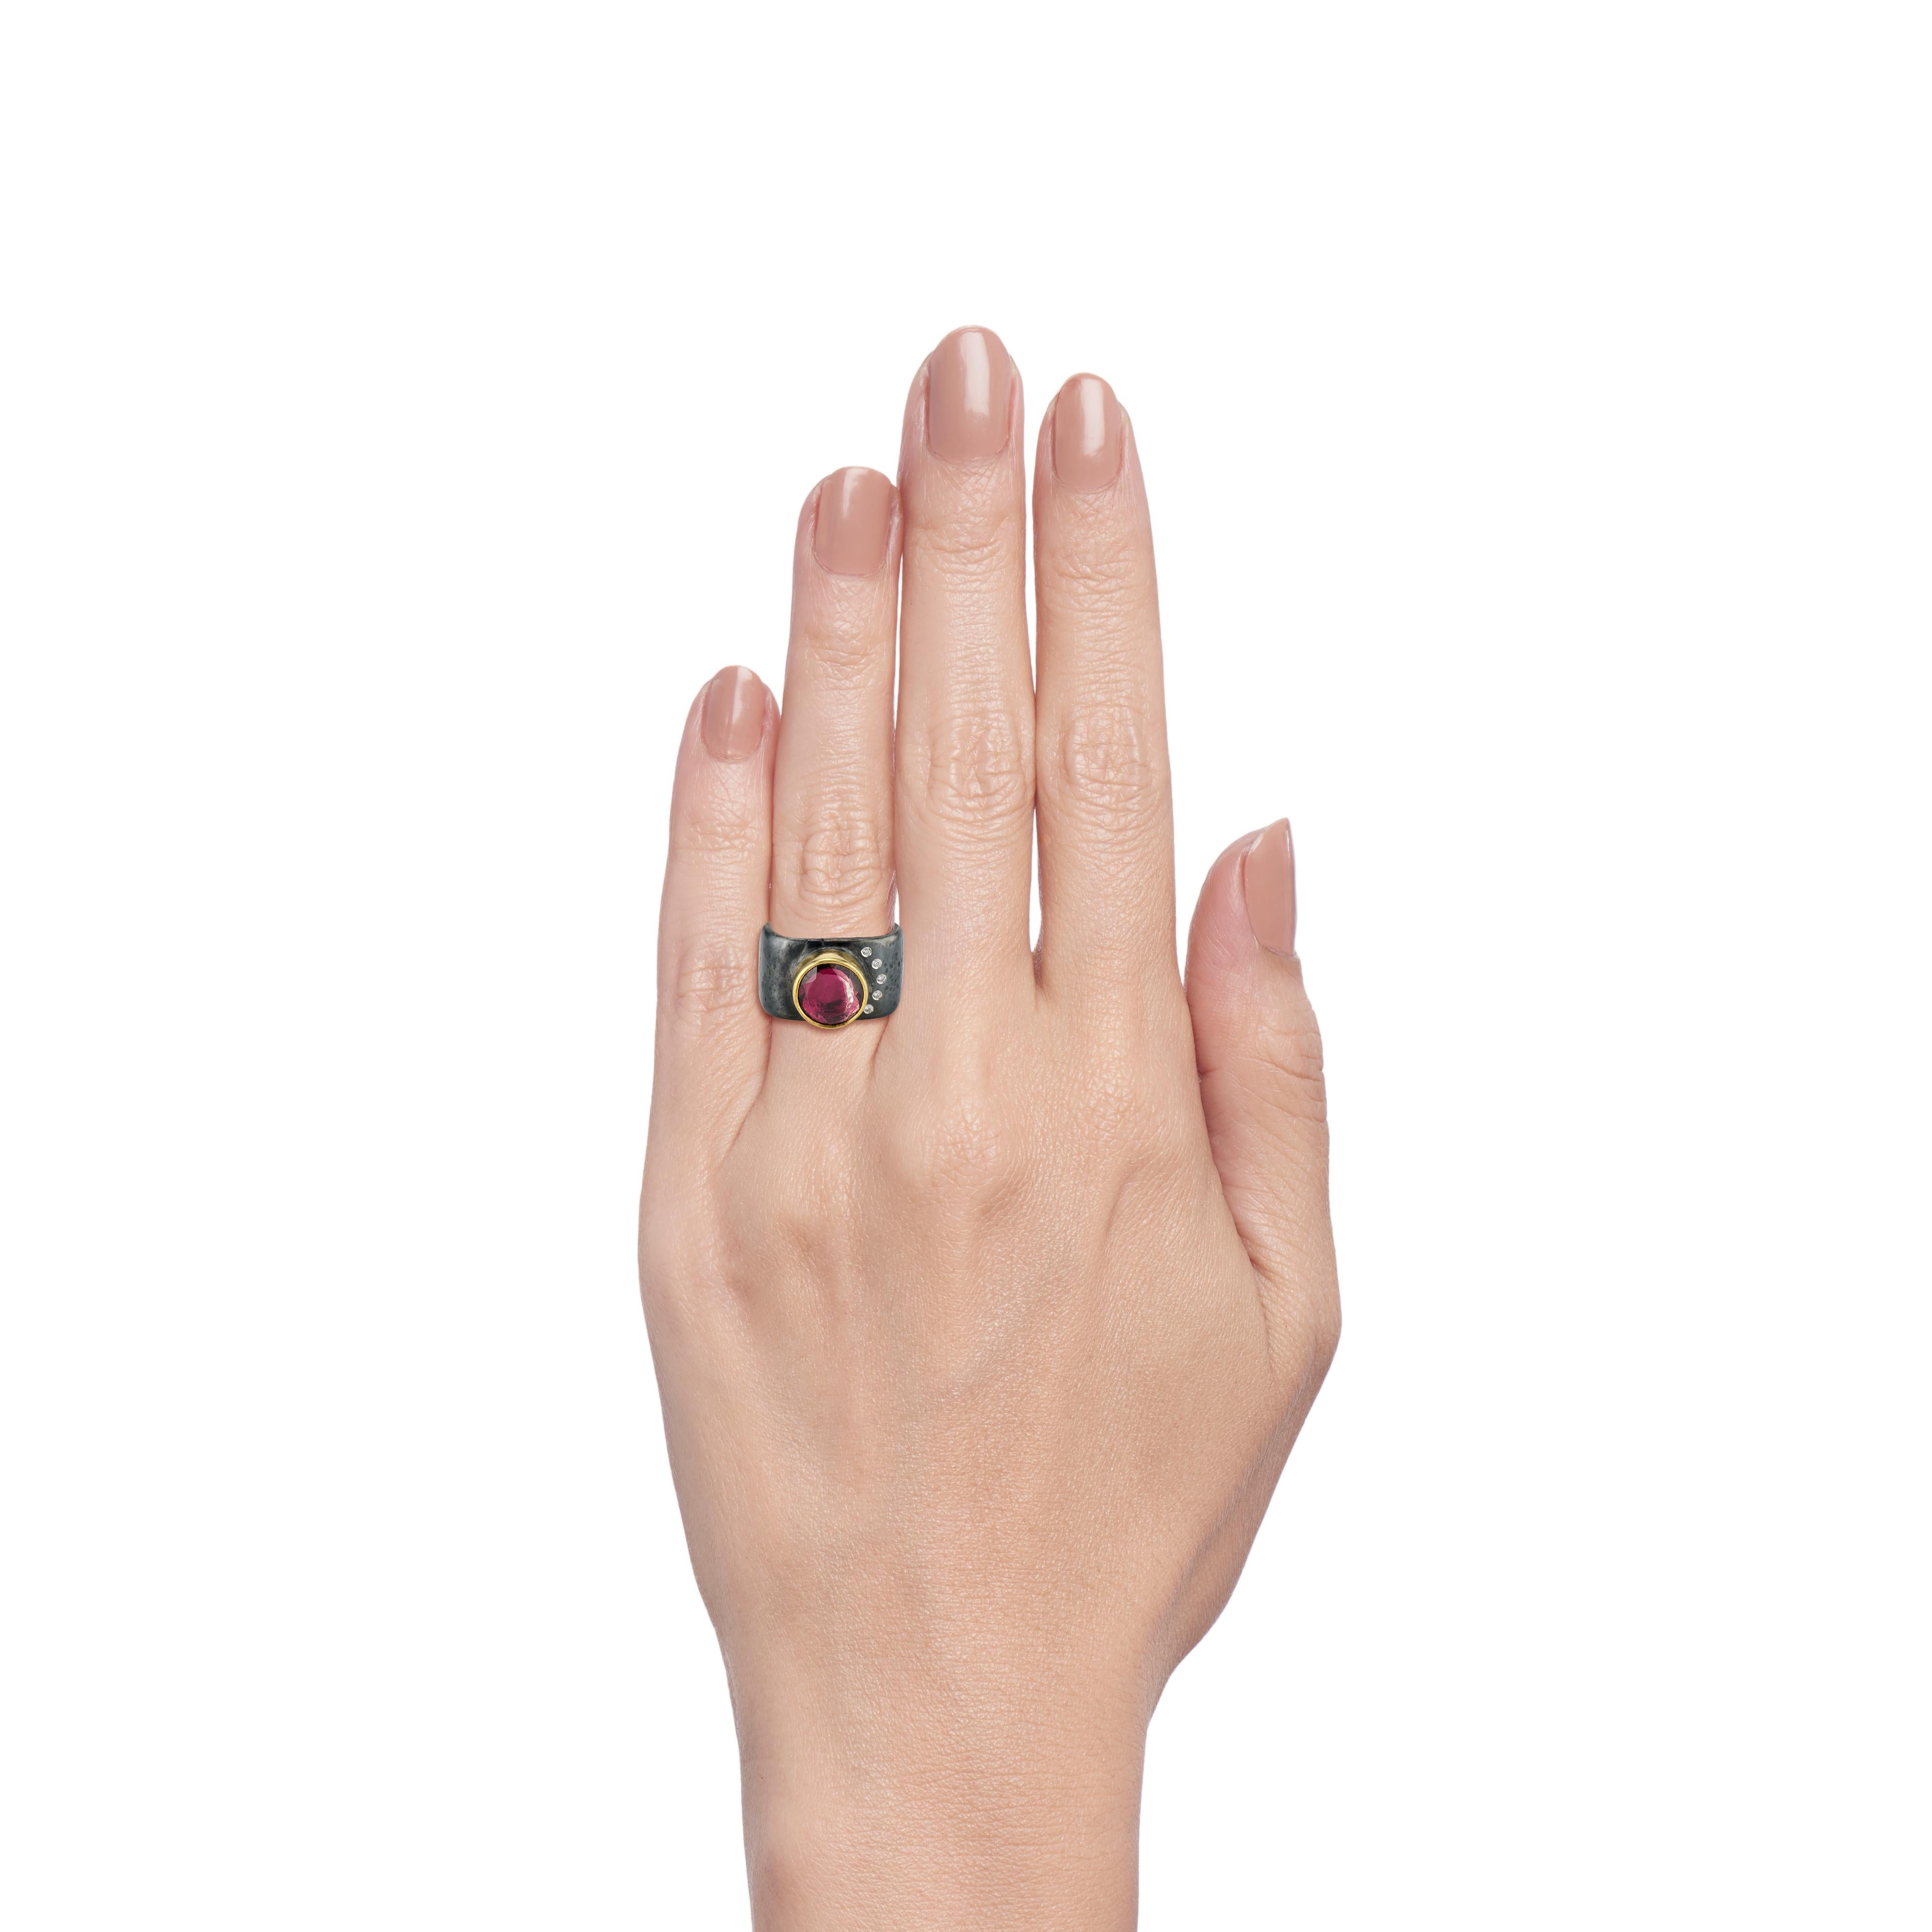 This contemporary take on a cocktail ring consists of a 2.5 carat rose cut mauve tourmaline framed in a 22 karat yellow gold bezel.  The white melee diamonds (0.075 total carat weight) are set in the 12mm wide band following the curvature of the